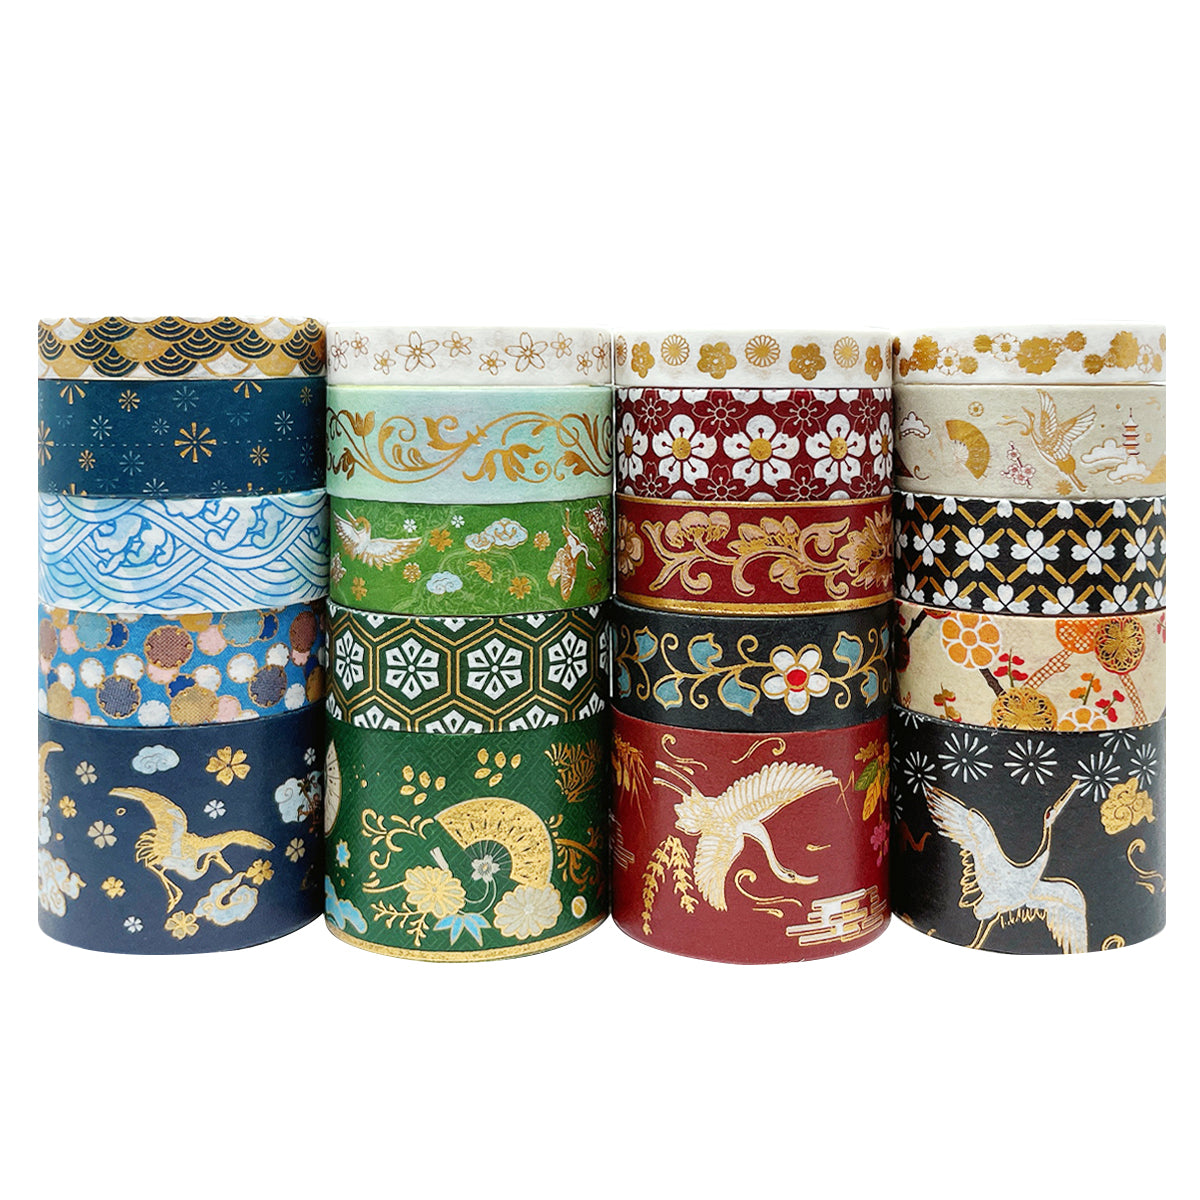 AEBORN Christmas Washi Tape Set - 21 Rolls Gold Foil Holiday Decorative Tapes Perfect for Bullet Journal, Scrapbook, Gift Packaging, DIY Crafts